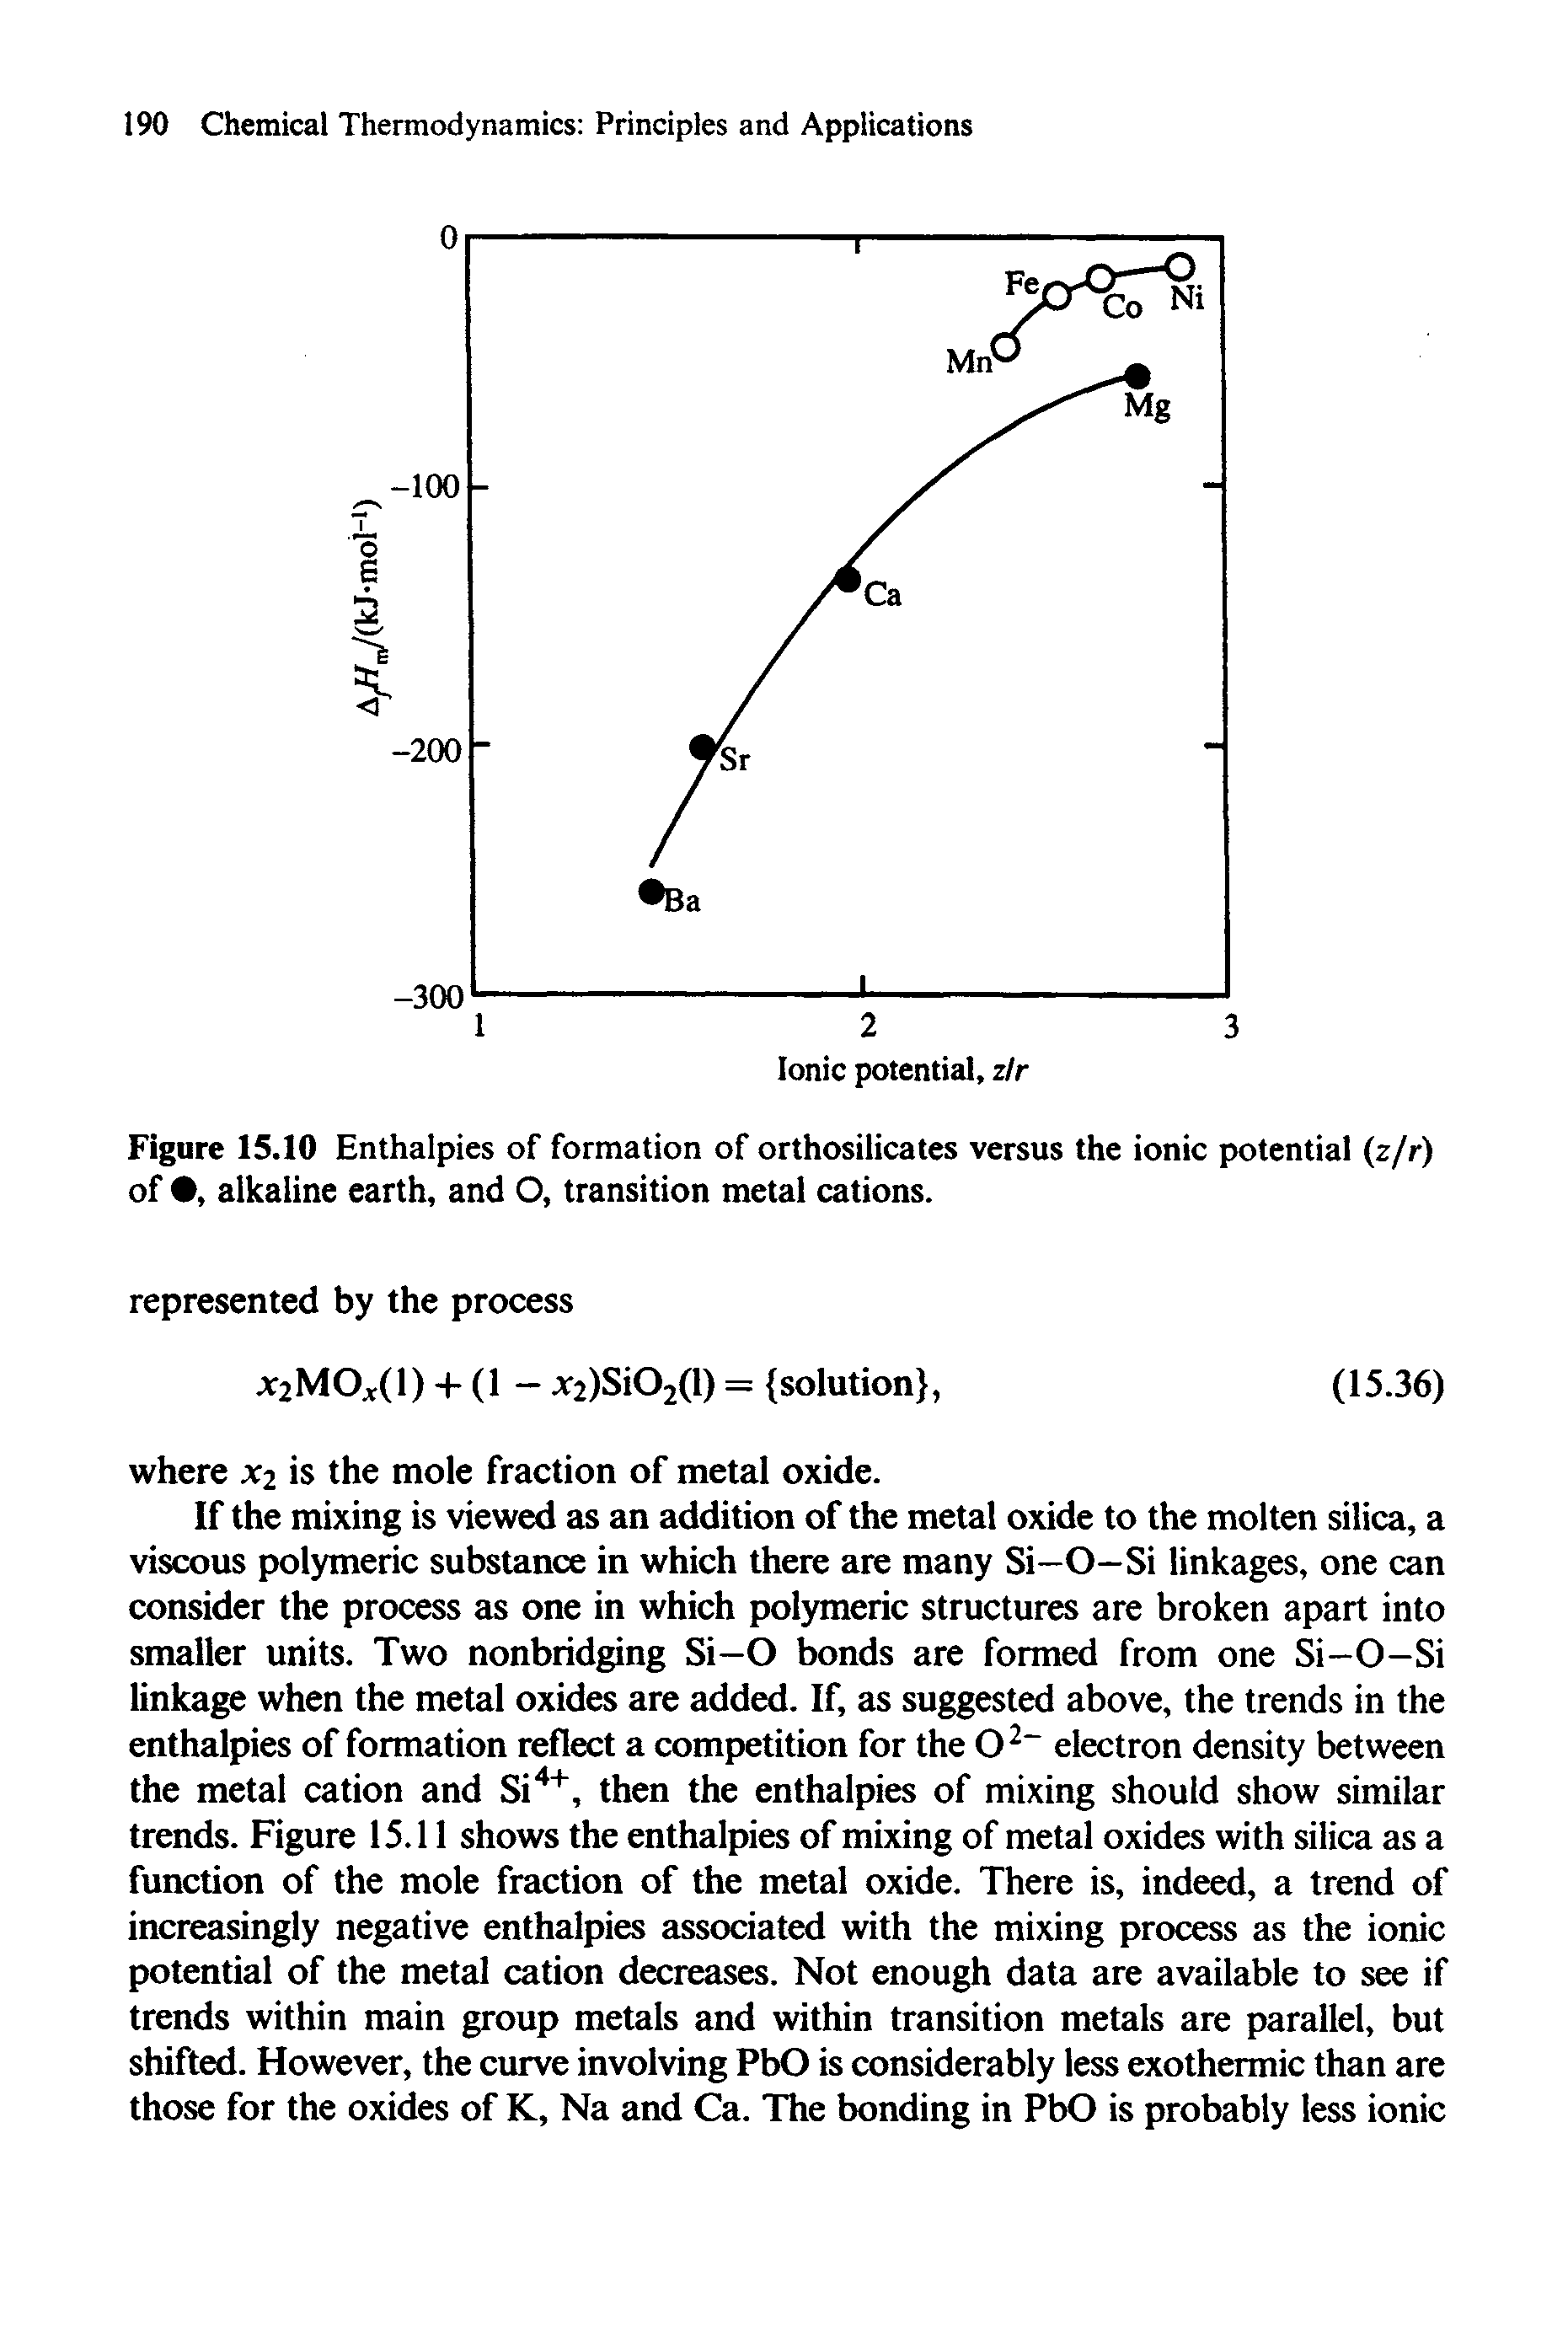 Figure 15.10 Enthalpies of formation of orthosilicates versus the ionic potential (z/r) of , alkaline earth, and O, transition metal cations.